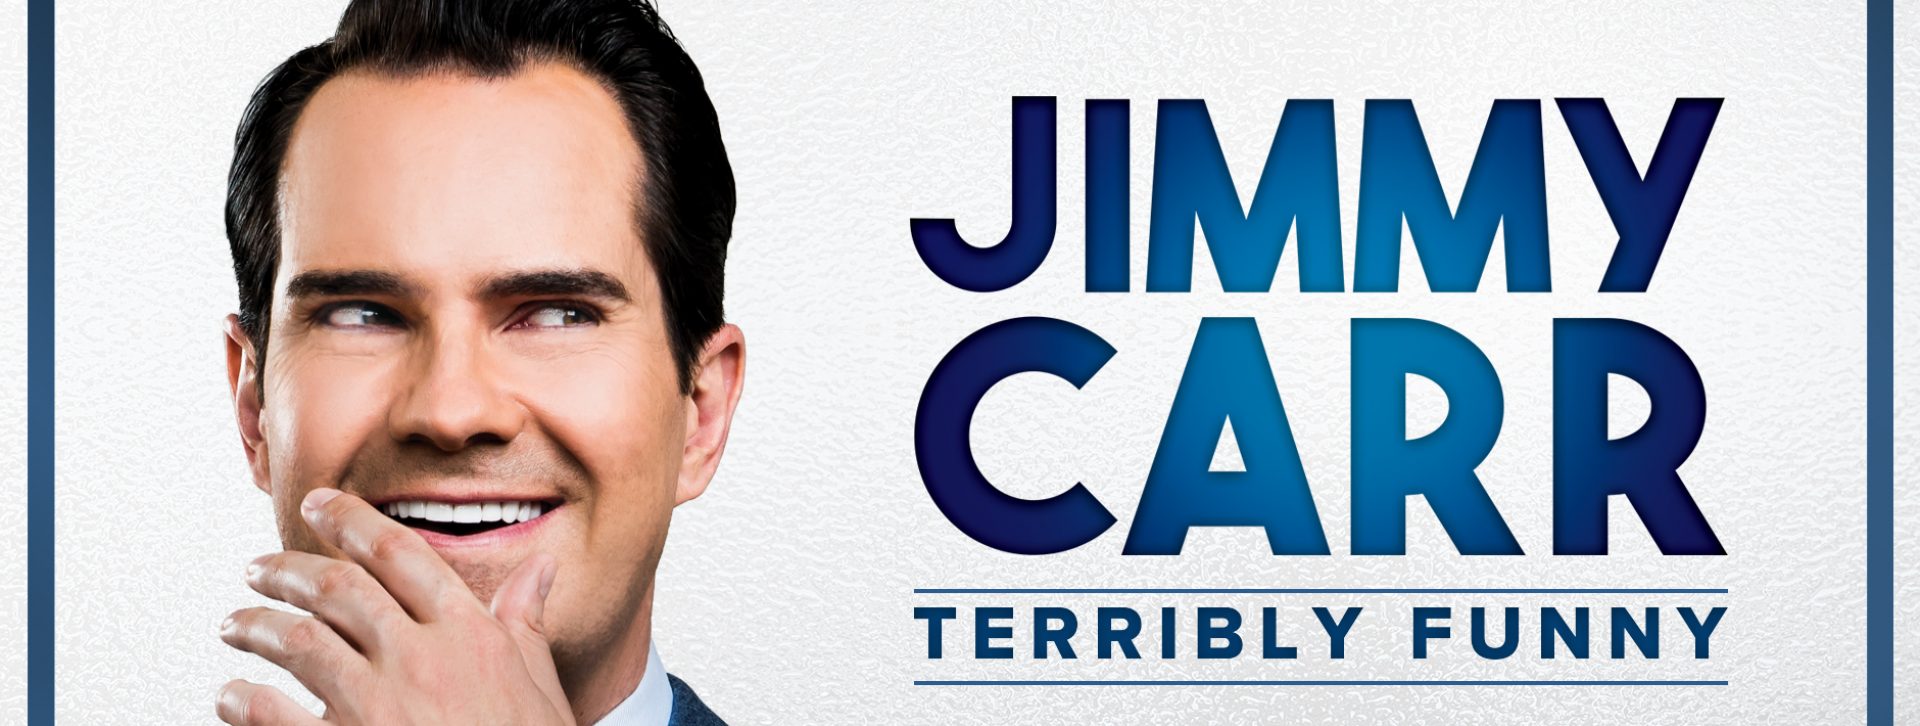 Jimmy Carr: Terribly Carr